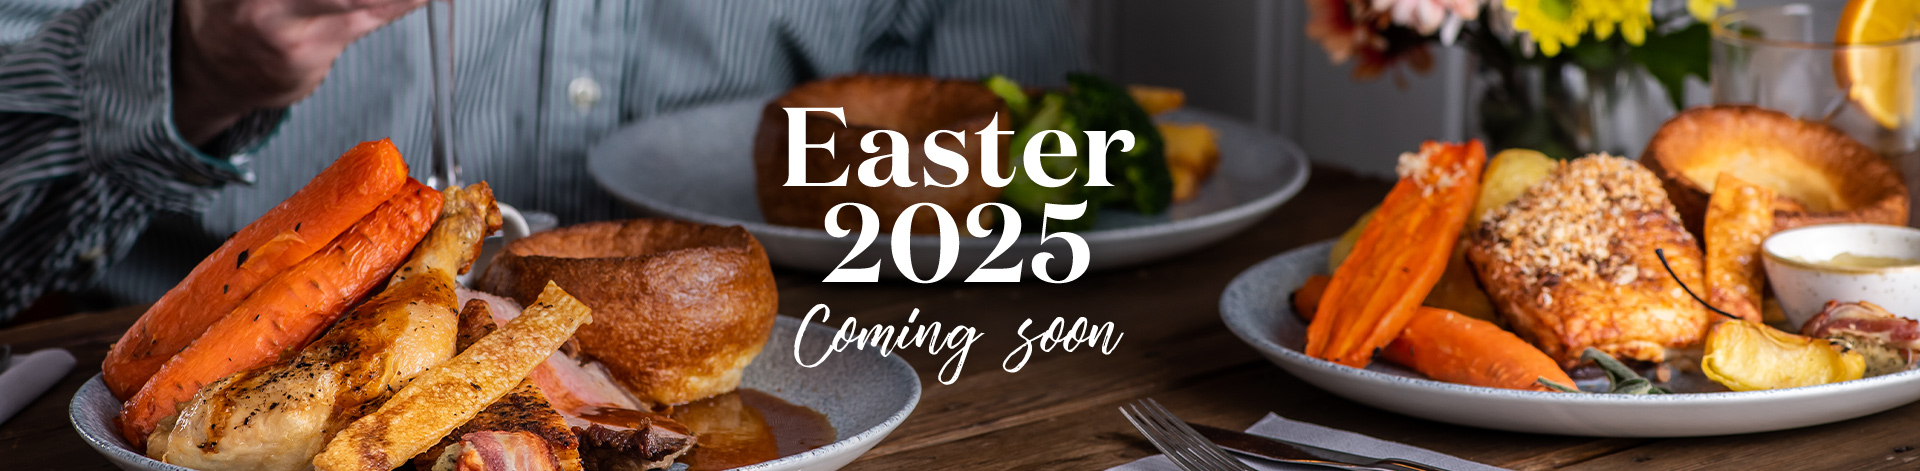 Easter at The Crown, Ardleigh in Colchester